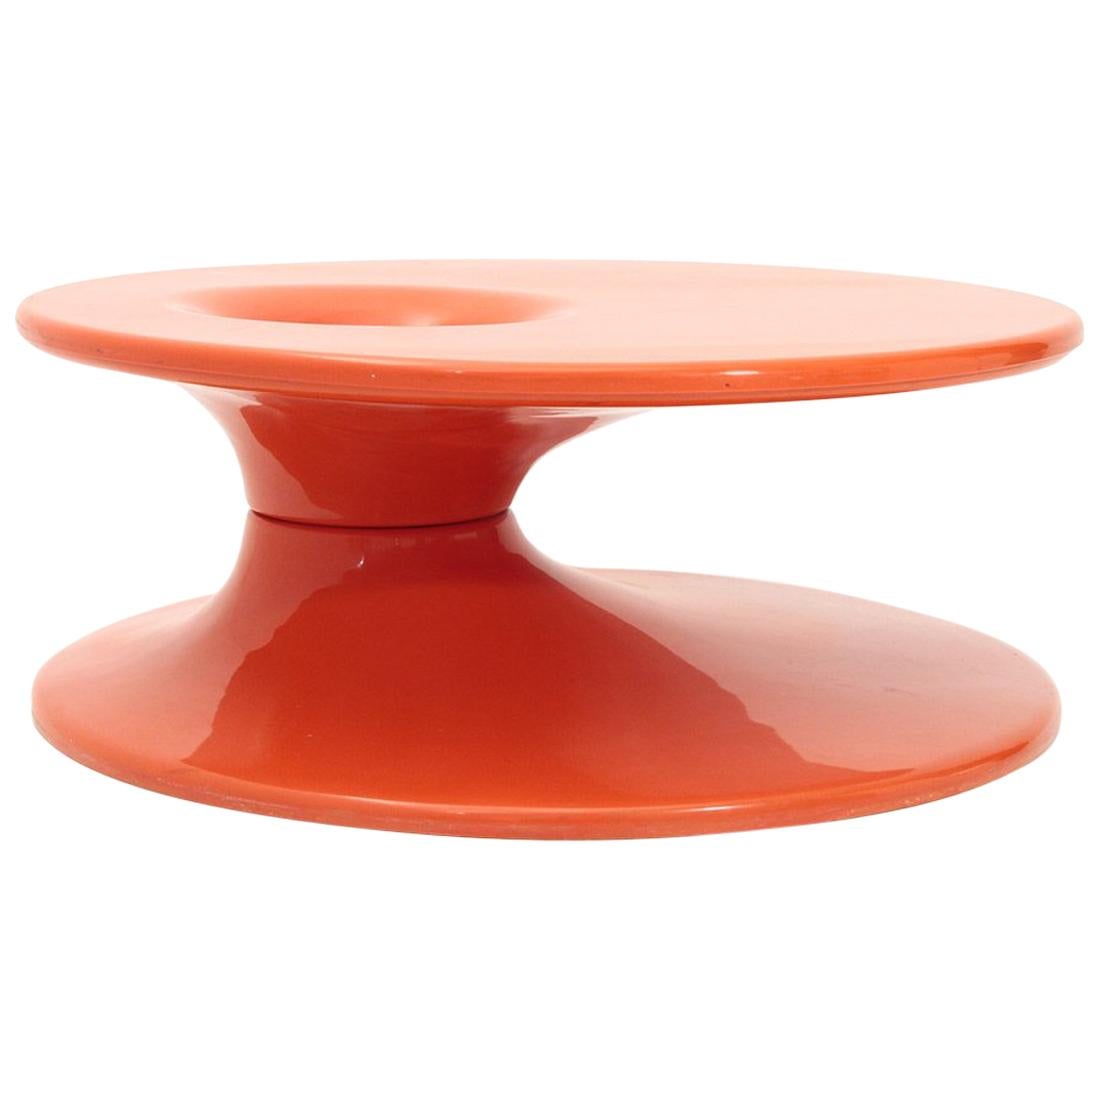 Space Age Orange Coffee Table, 1970s